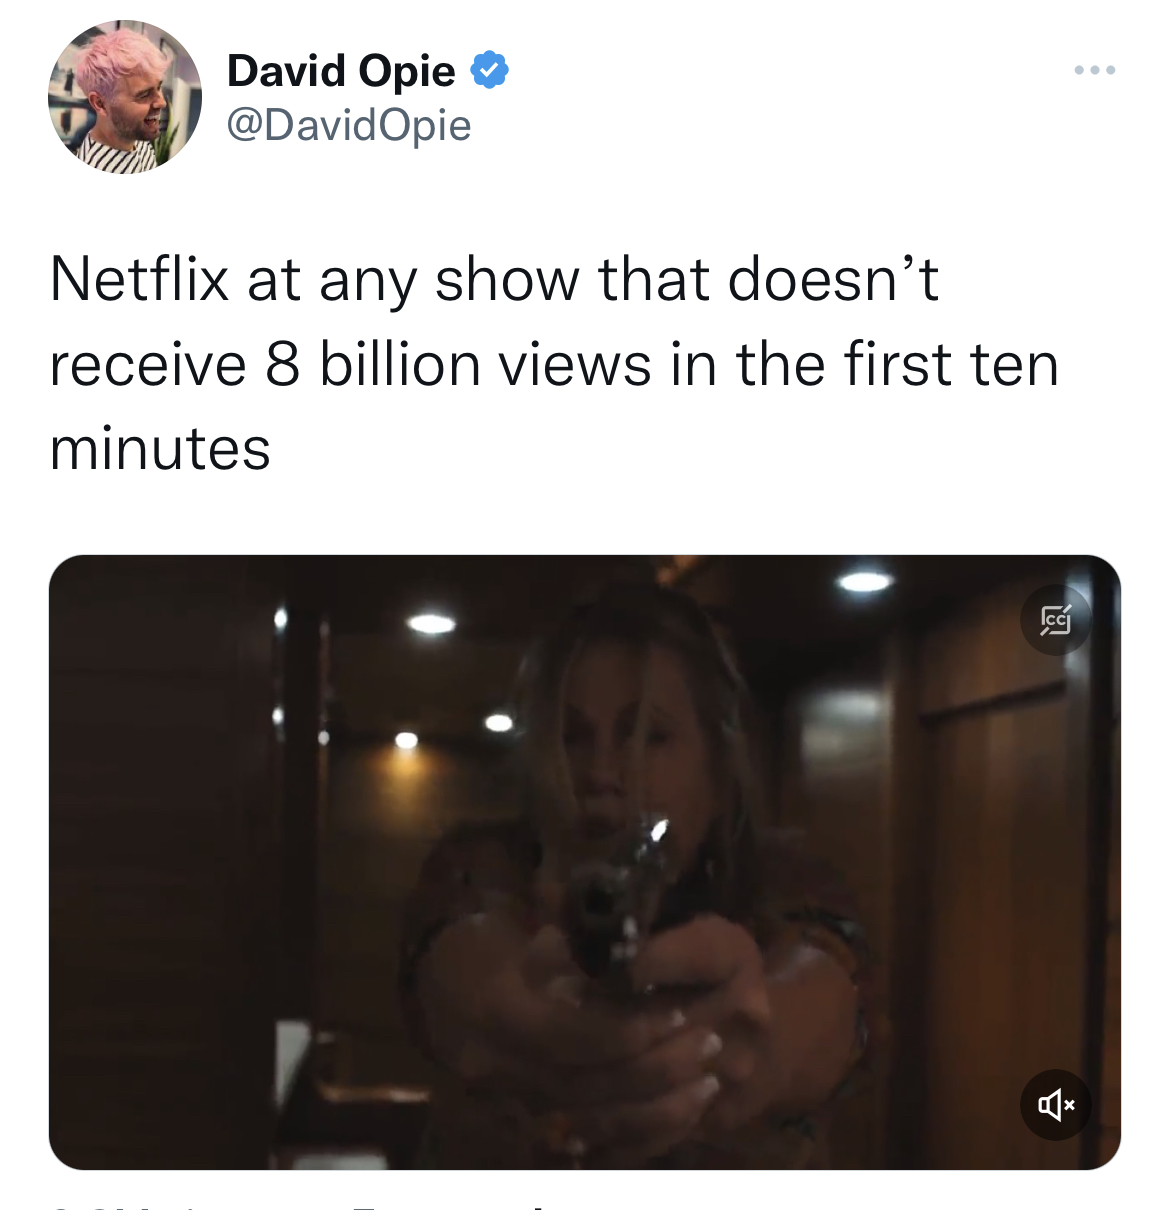 Tweets dunking on celebs - photo caption - David Opie Netflix at any show that doesn't receive 8 billion views in the first ten minutes 19